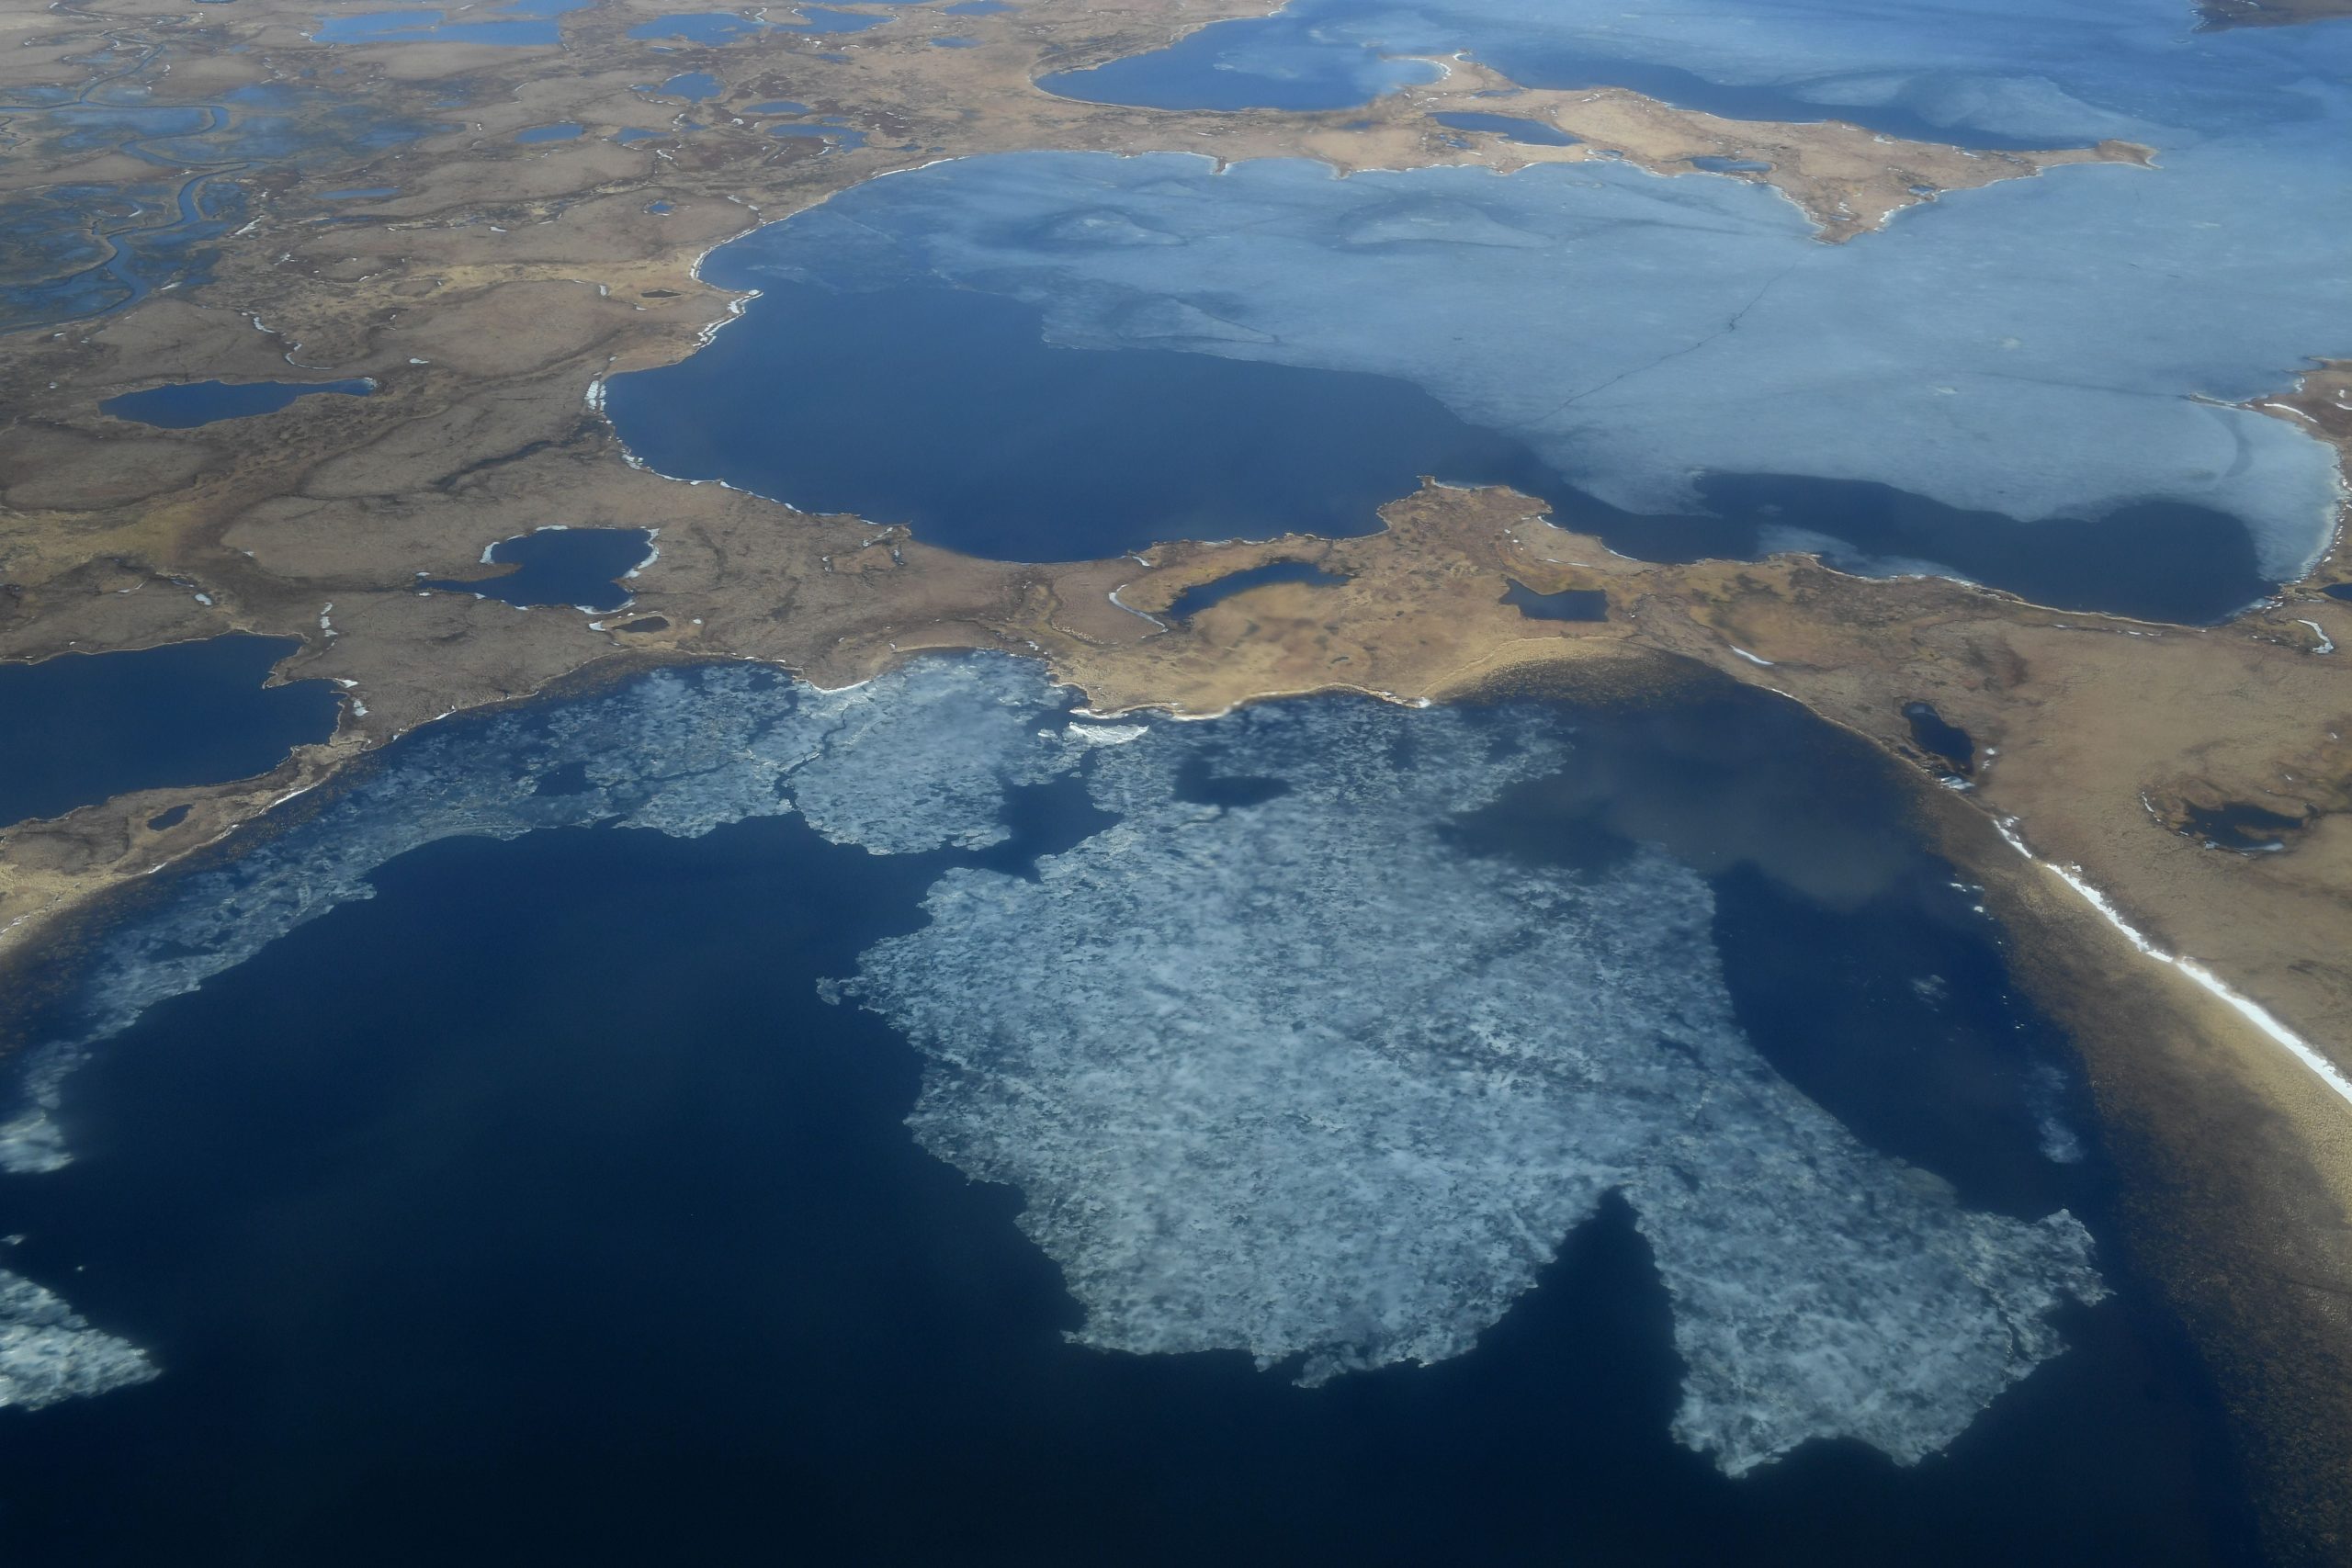 Melting Alaskan permafrost in 2019. (Photo: MARK RALSTON/AFP, Getty Images)